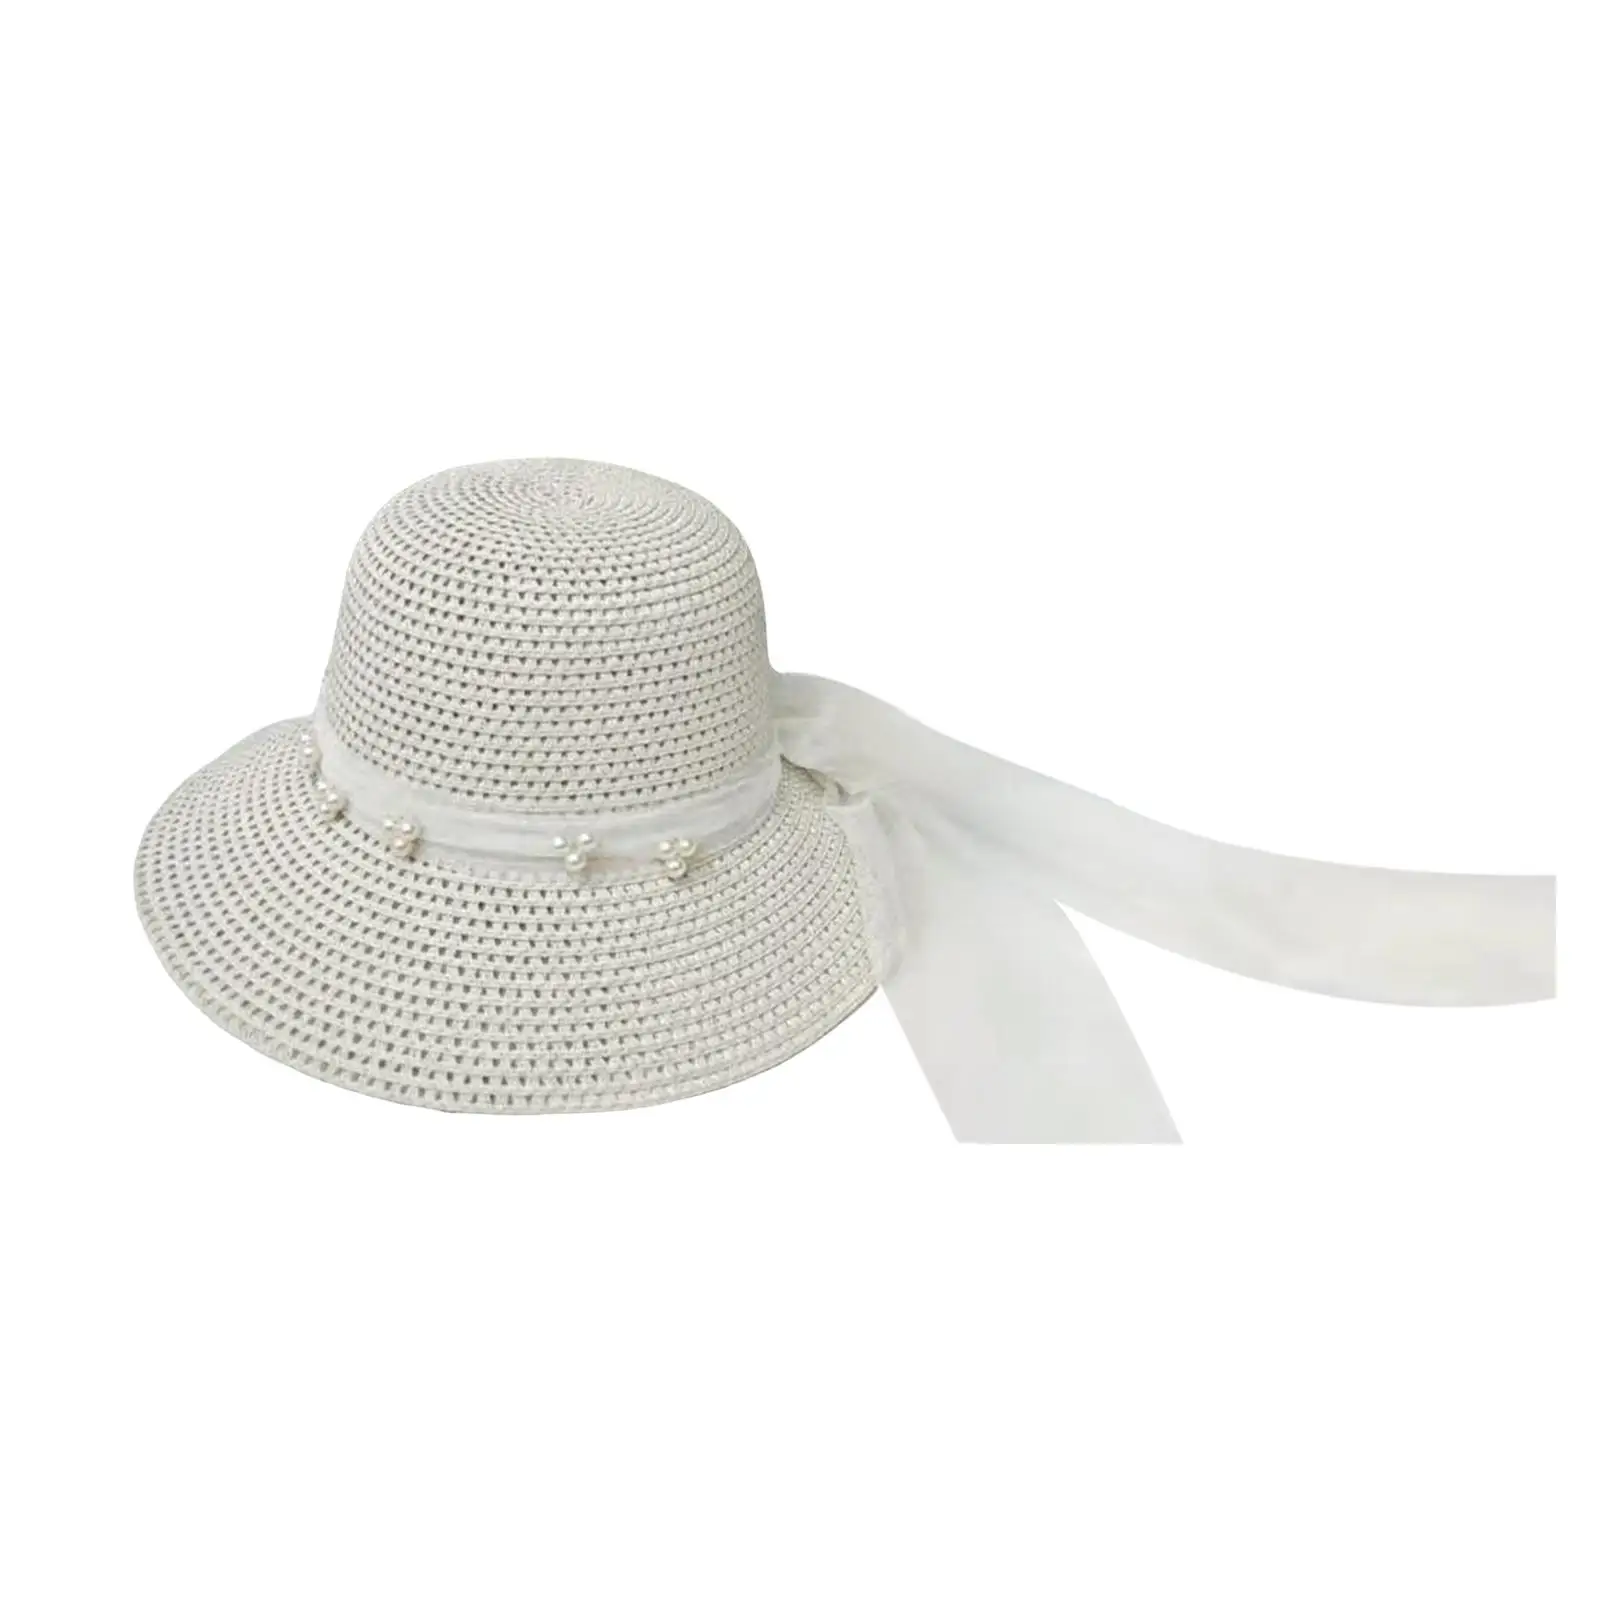 Womens Wide Brim Straw Hats, Lightweight Foldable Breathable Summer Beach Hats,